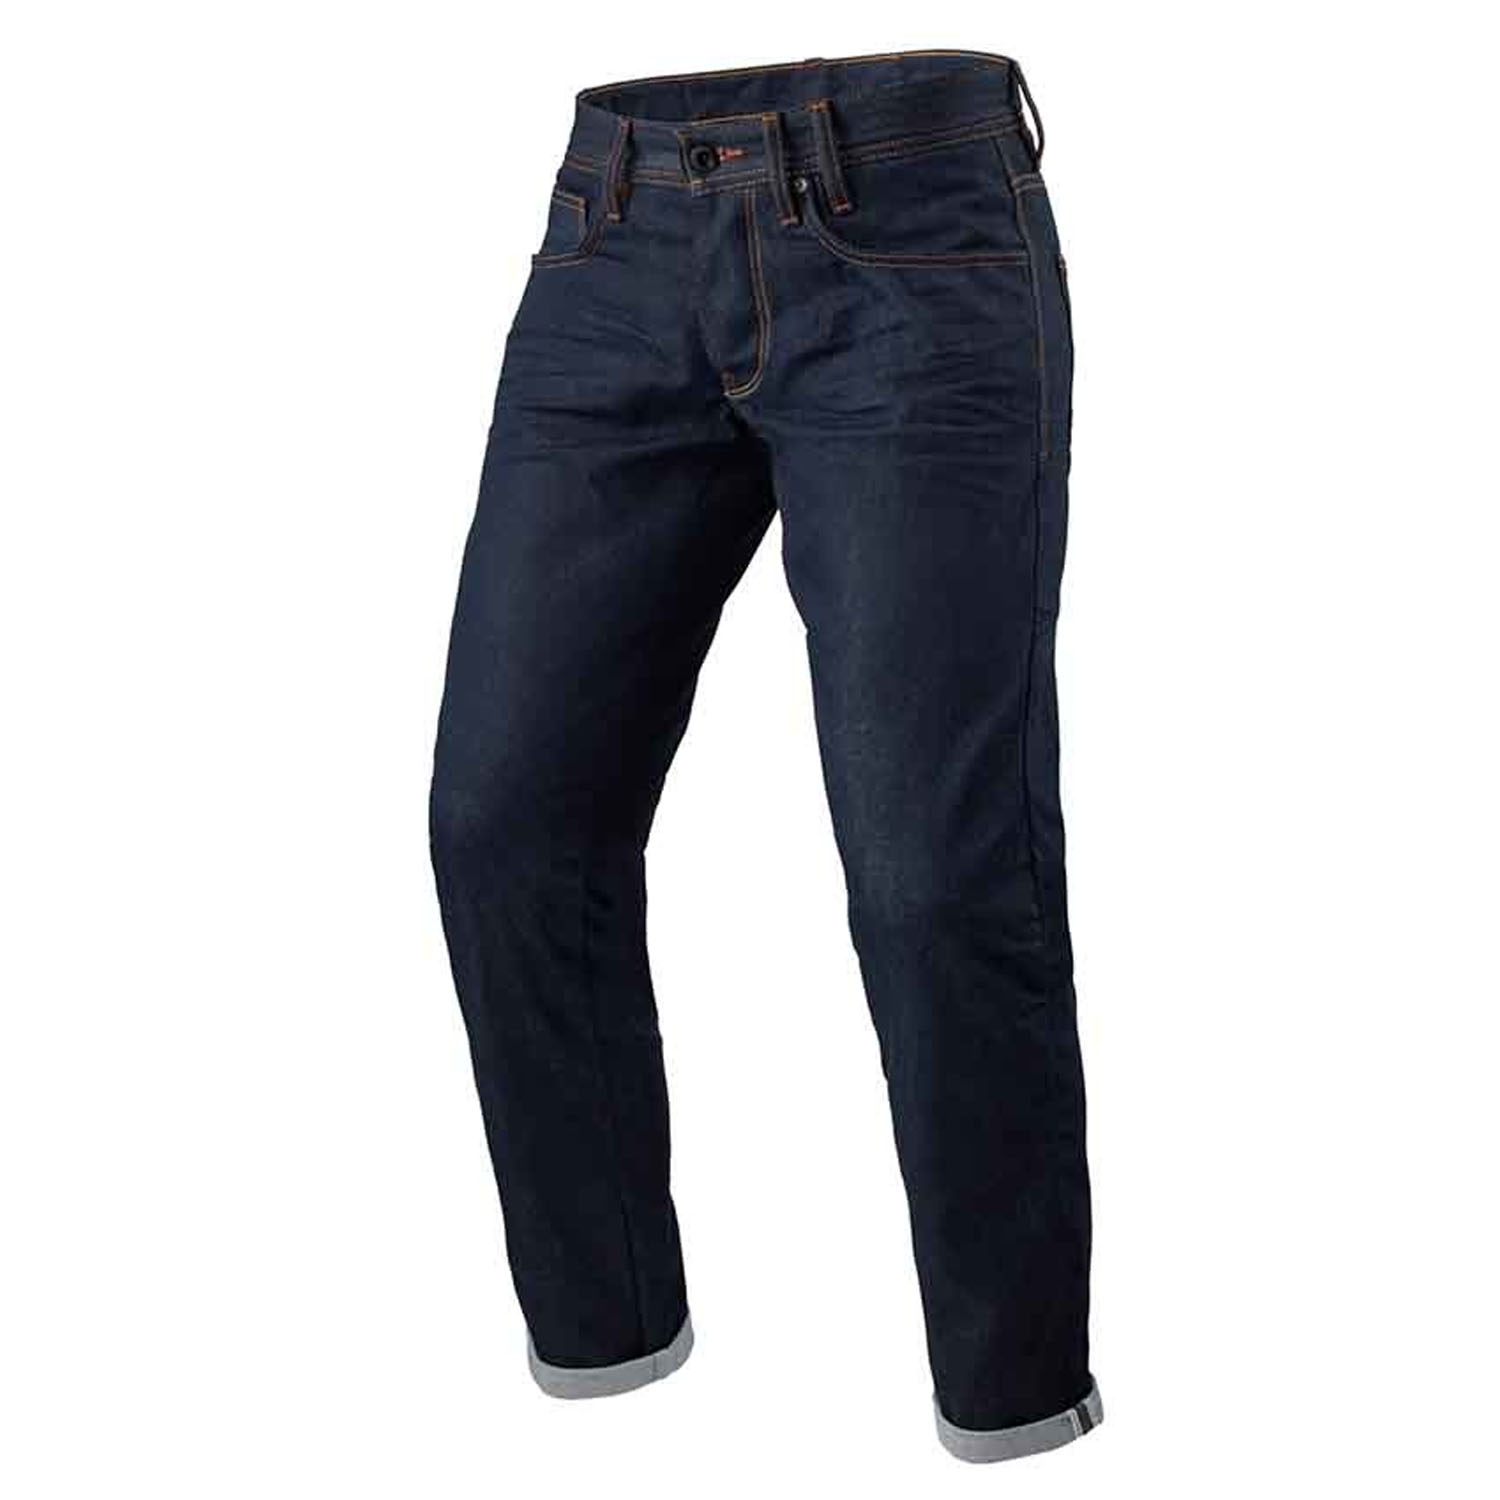 Image of REV'IT! Jeans Lewis Selvedge TF Dark Blue L36 Motorcycle Pants Size L36/W38 ID 8700001358156